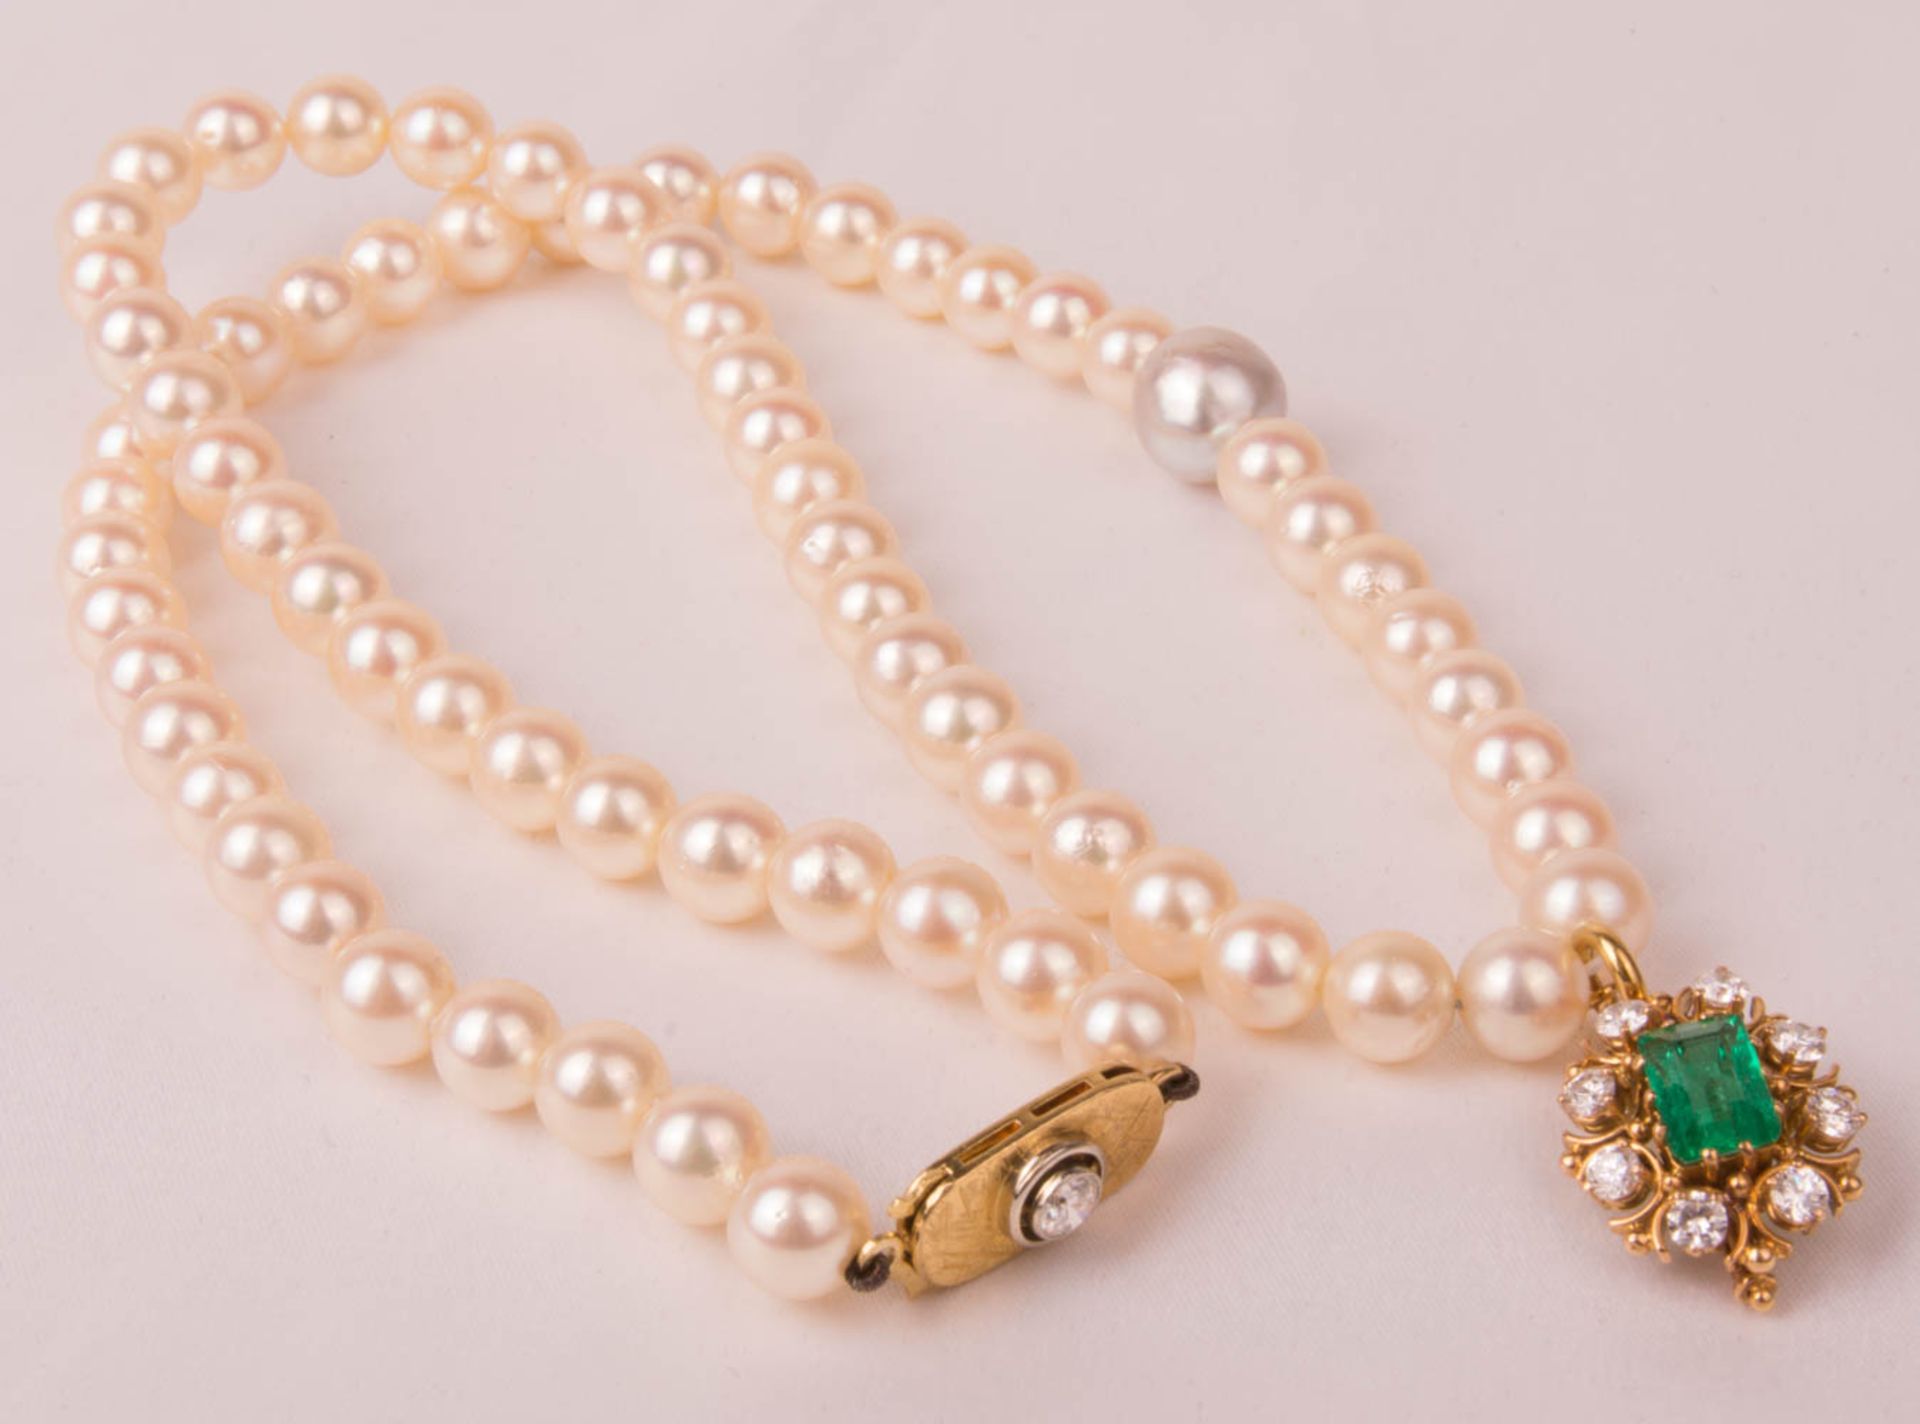 Pearl necklace with diamond set pendant, 750 yellow gold.